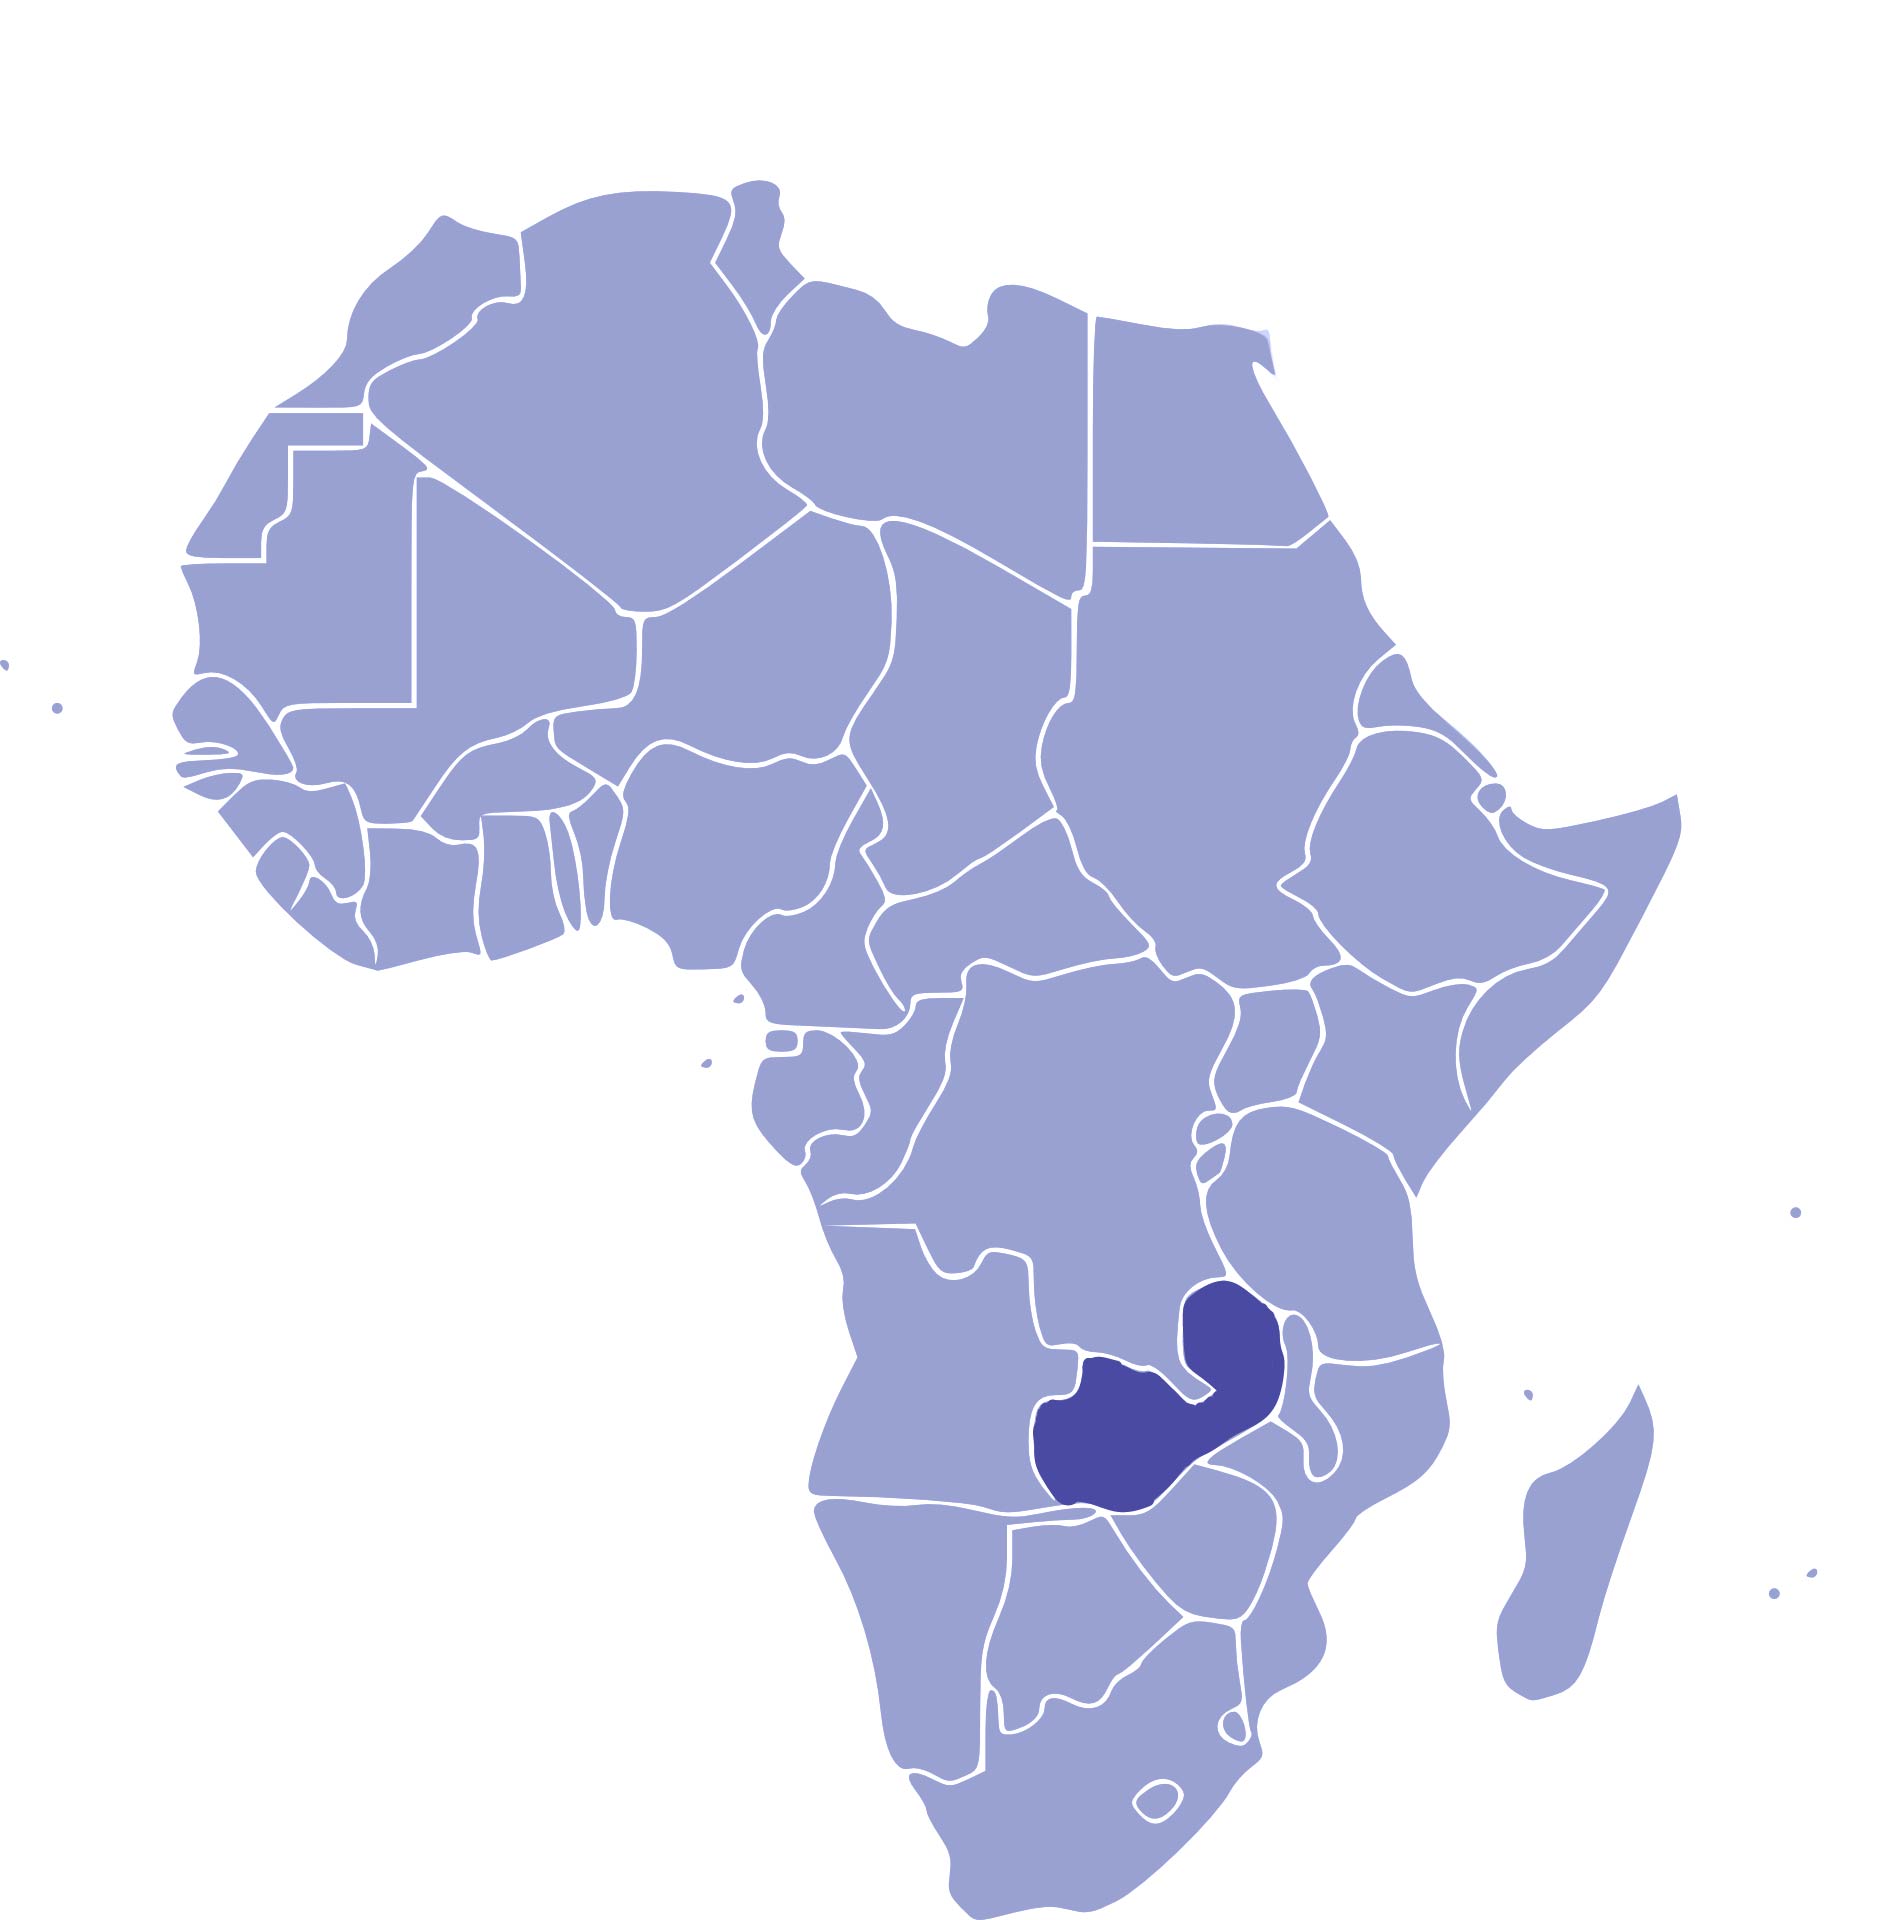 Africa map, Zambia highlighted in south.